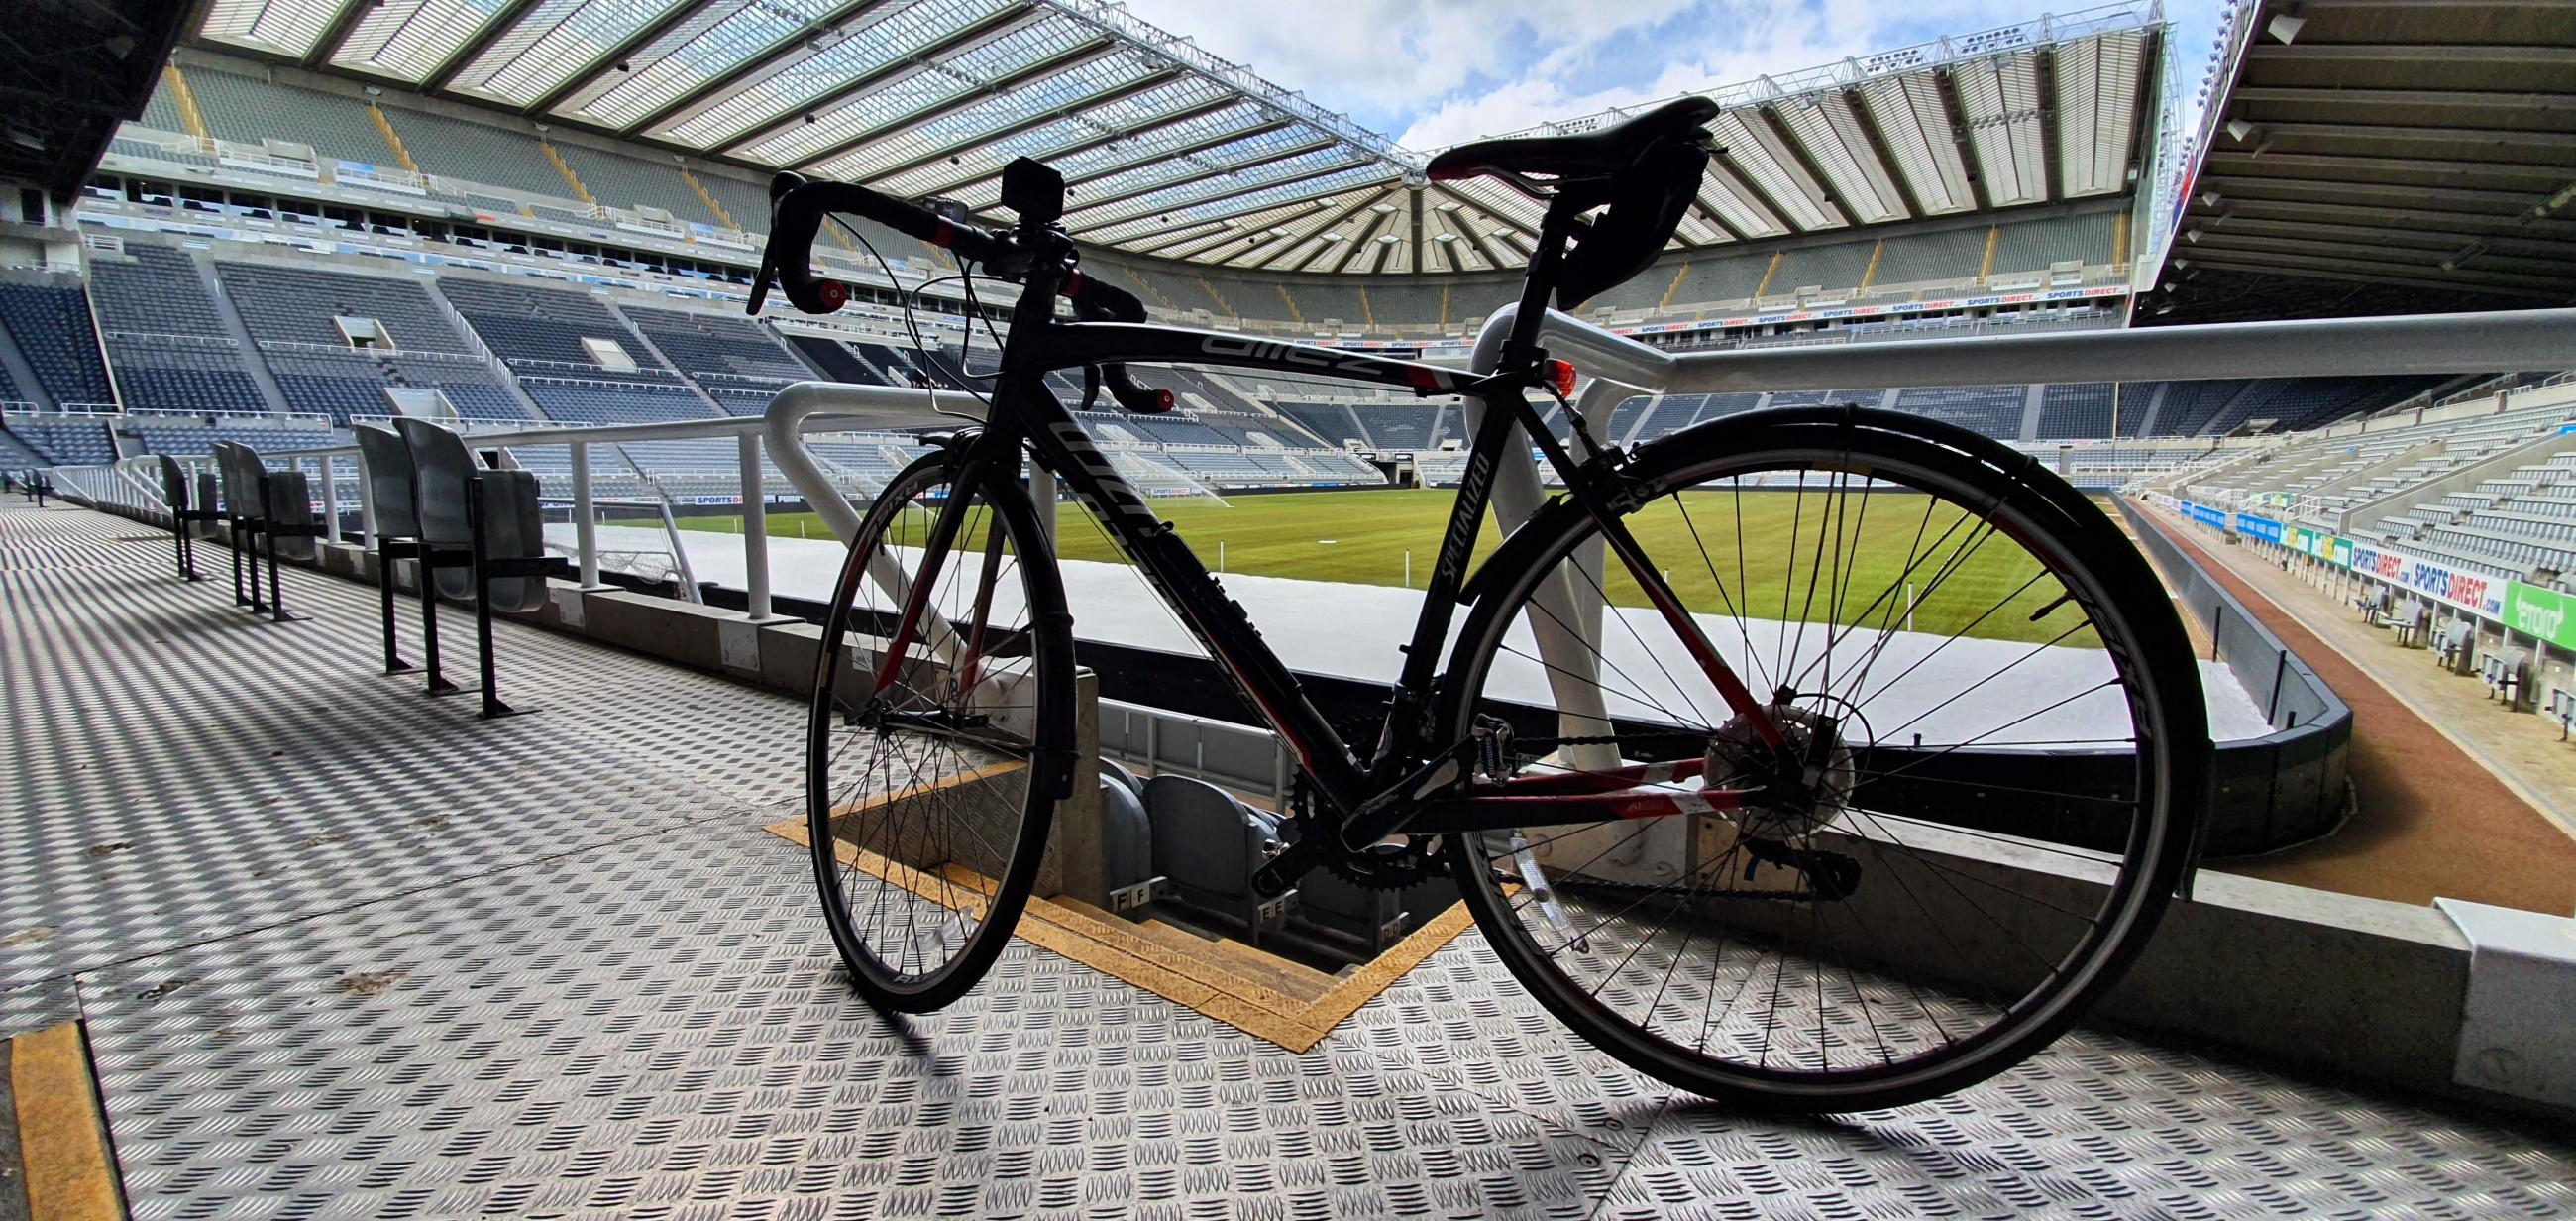 Participants will be able to enjoy a lap around the pitch at St James' Park